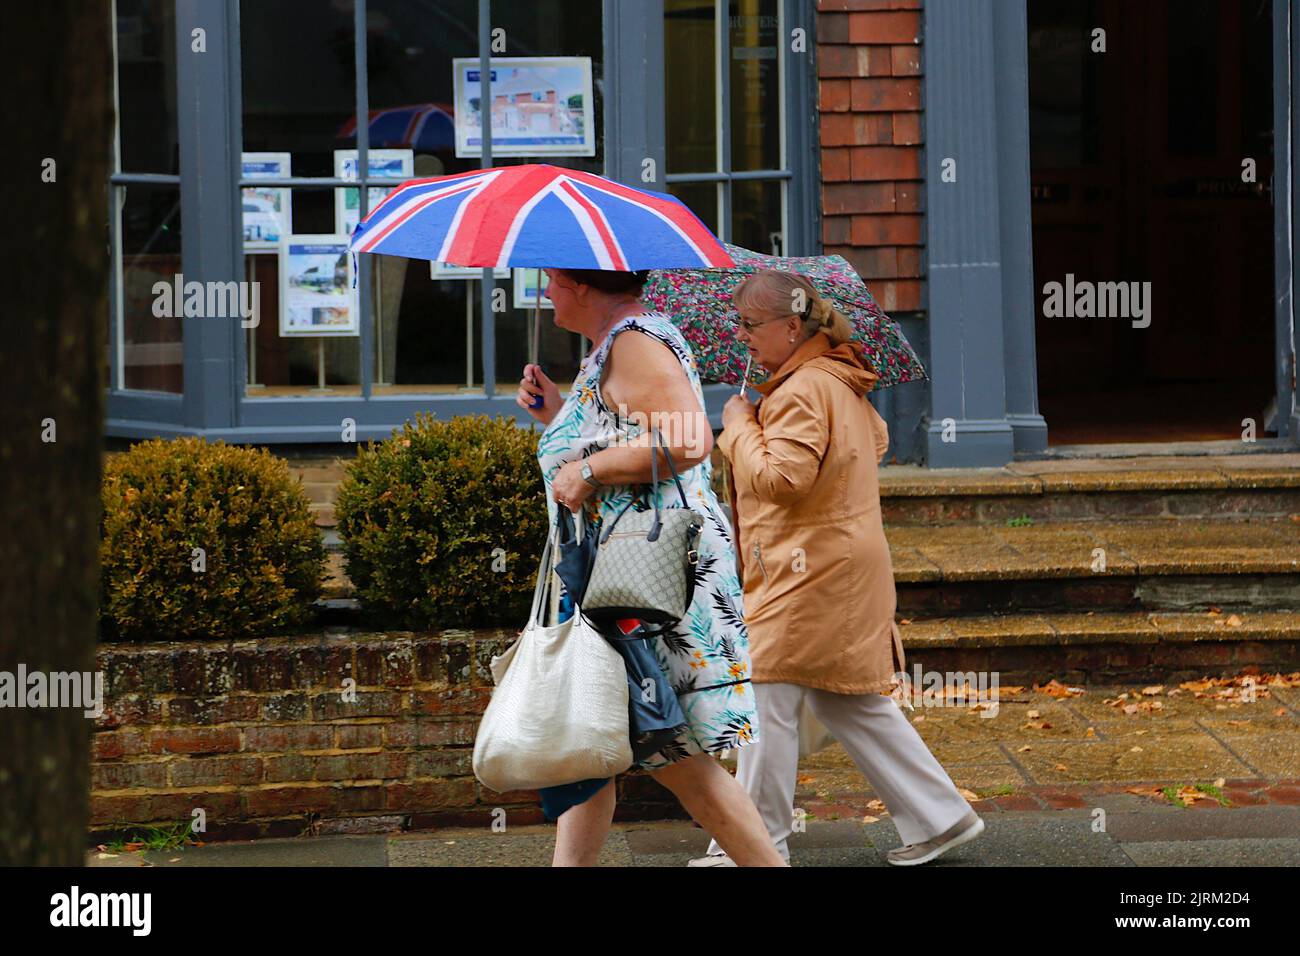 Tenterden, Kent, UK. 25 Aug, 2022. UK Weather: Heavy rain and thunder expected to roll into the South East. Colourful umbrellas as Tenterden town is hit by rain. Photo Credit: Paul Lawrenson /Alamy Live News Stock Photo